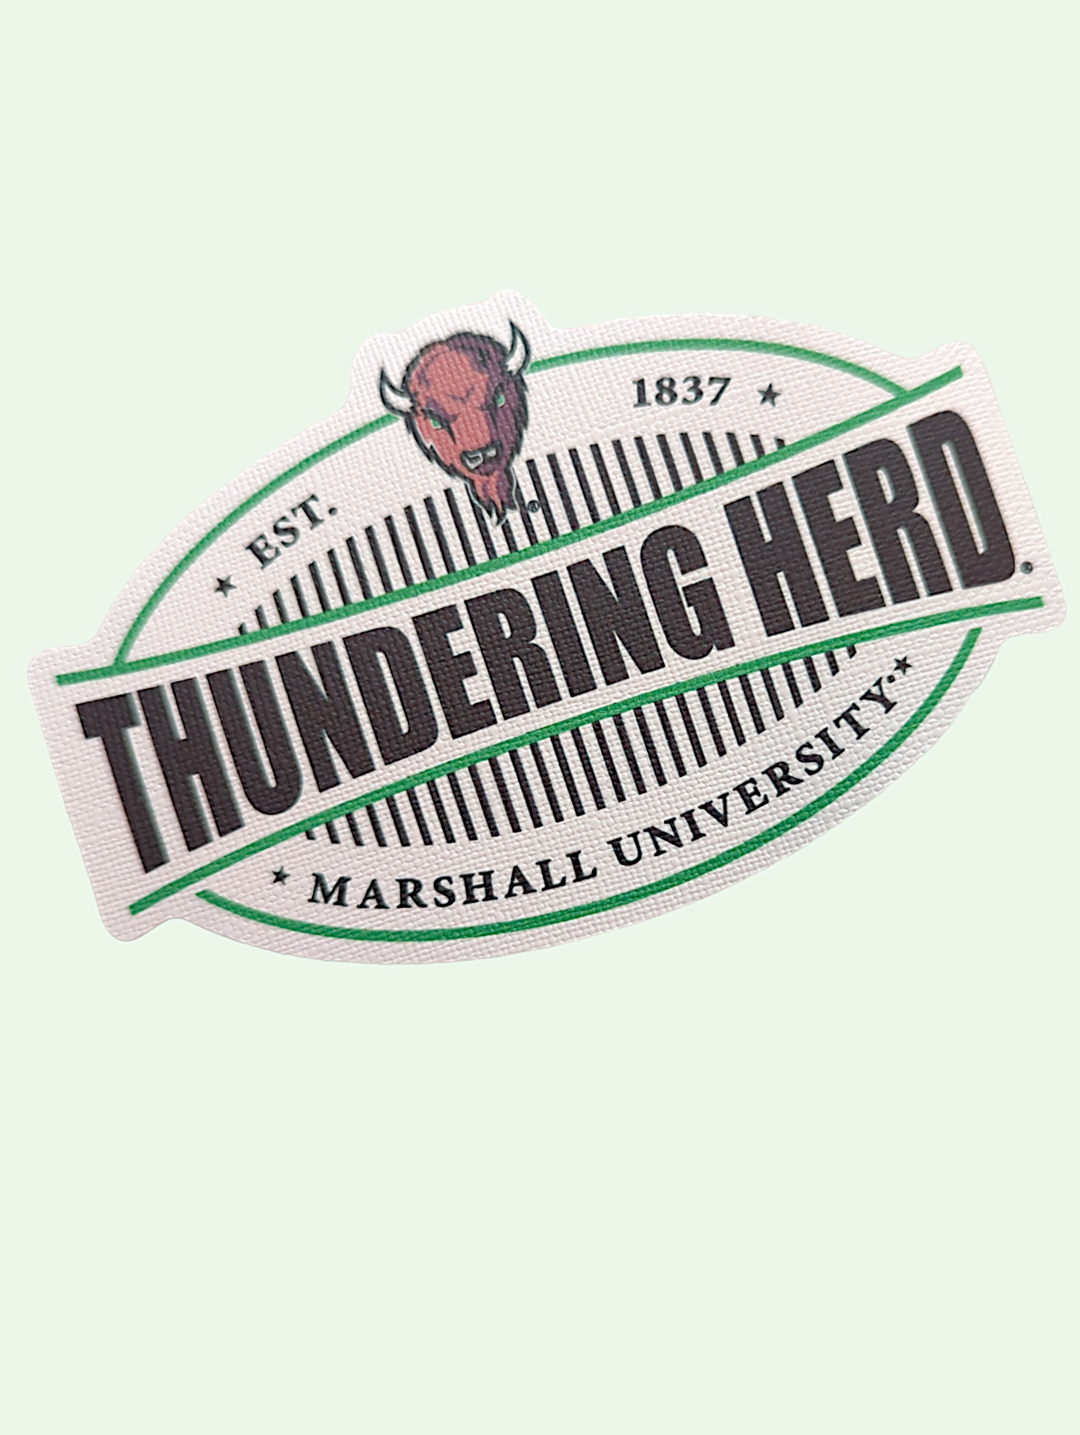 the marshall thundering herd sticker has stripes and a marco head